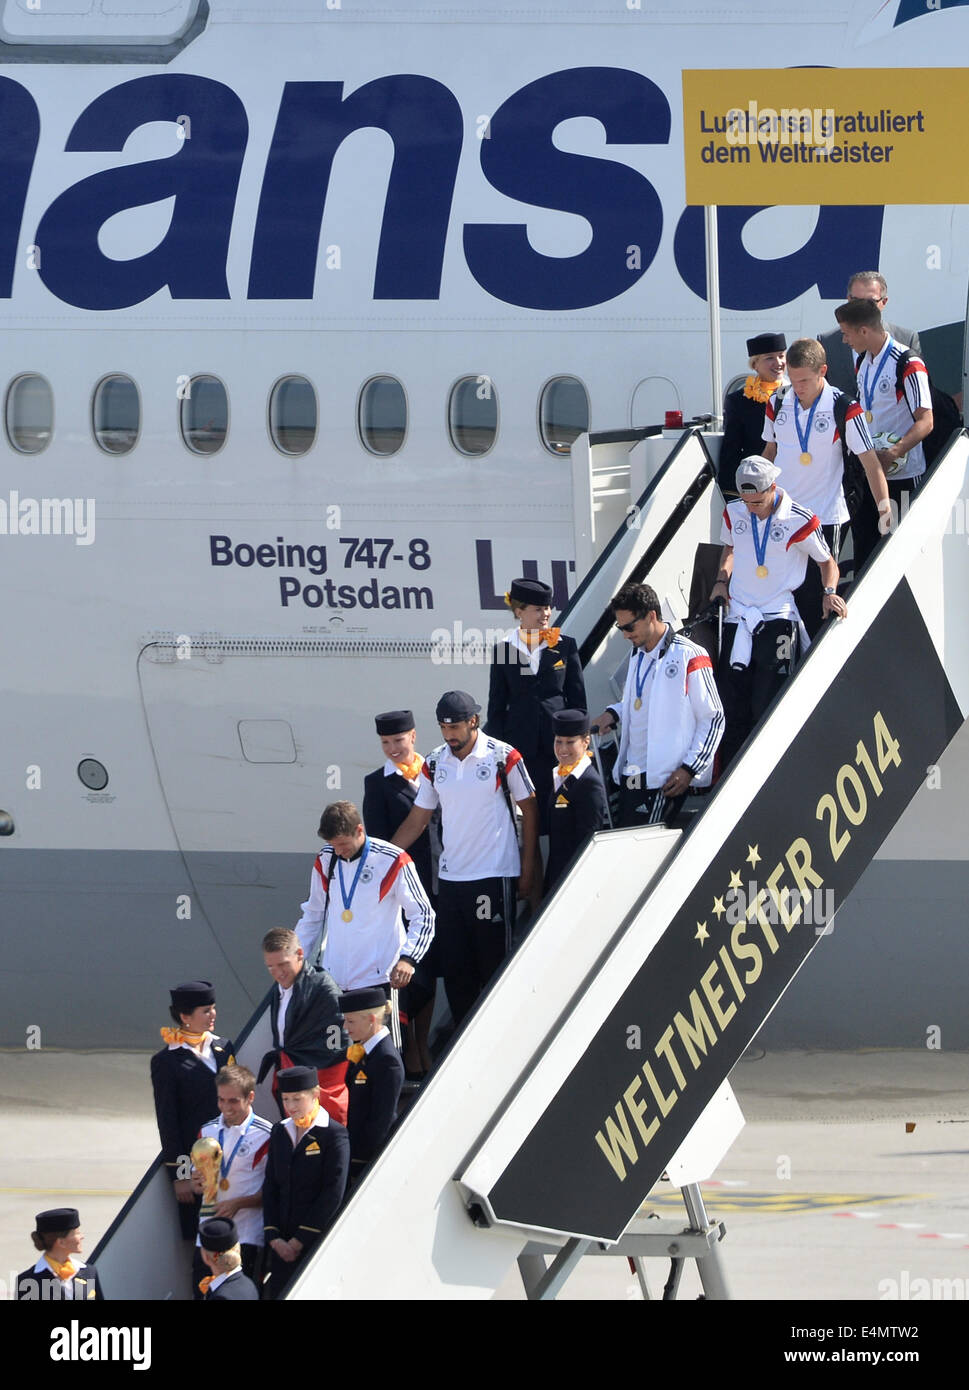 Berlin, Germany. 15th July, 2014. Germany's Philipp Lahm (bottom, C) steps out of the aircraft holding the World Cup trophy in his hands as Germany's national soccer squad arrives at Tegel airport in Berlin, Germany, 15 July 2014. Team Germany won the Brazil 2014 FIFA Soccer World Cup final against Argentina by 1-0, winning the World Champion title for the fourth time after the 1954, 1974 and 1990 World Cups. PHOTO: BERND VON JUTRCZENKA/dpa/Alamy Live News Stock Photo